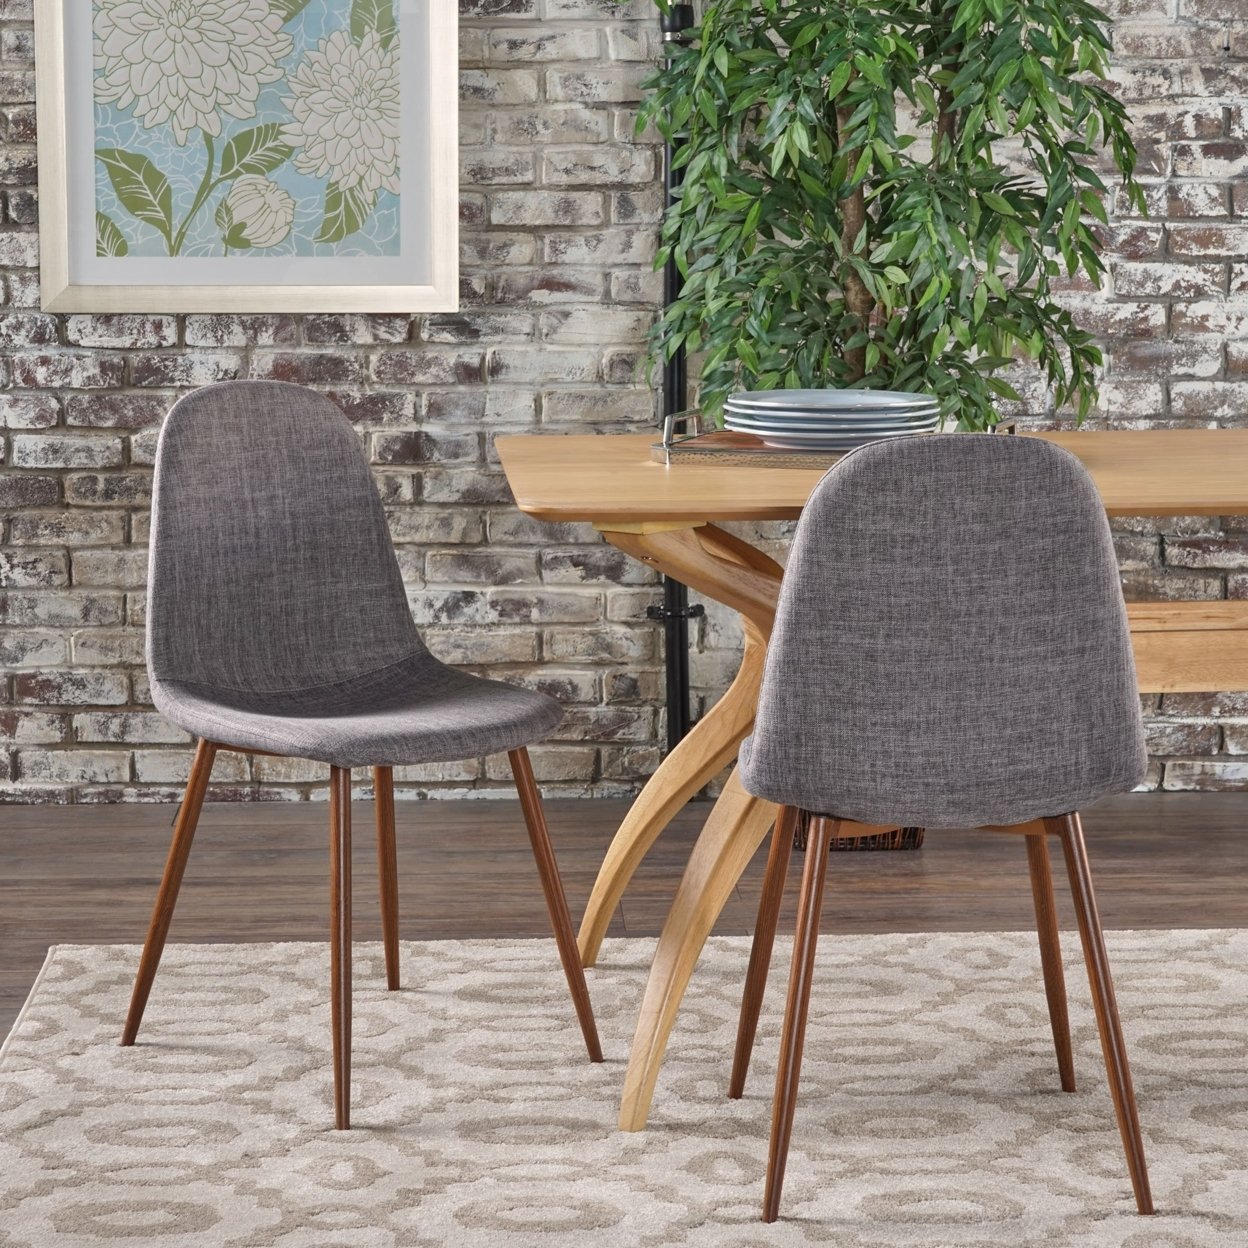 Resta Mid Century Fabric Dining Chairs With Wood Finished Metal Legs (Set Of 2) - Green/Light Brown